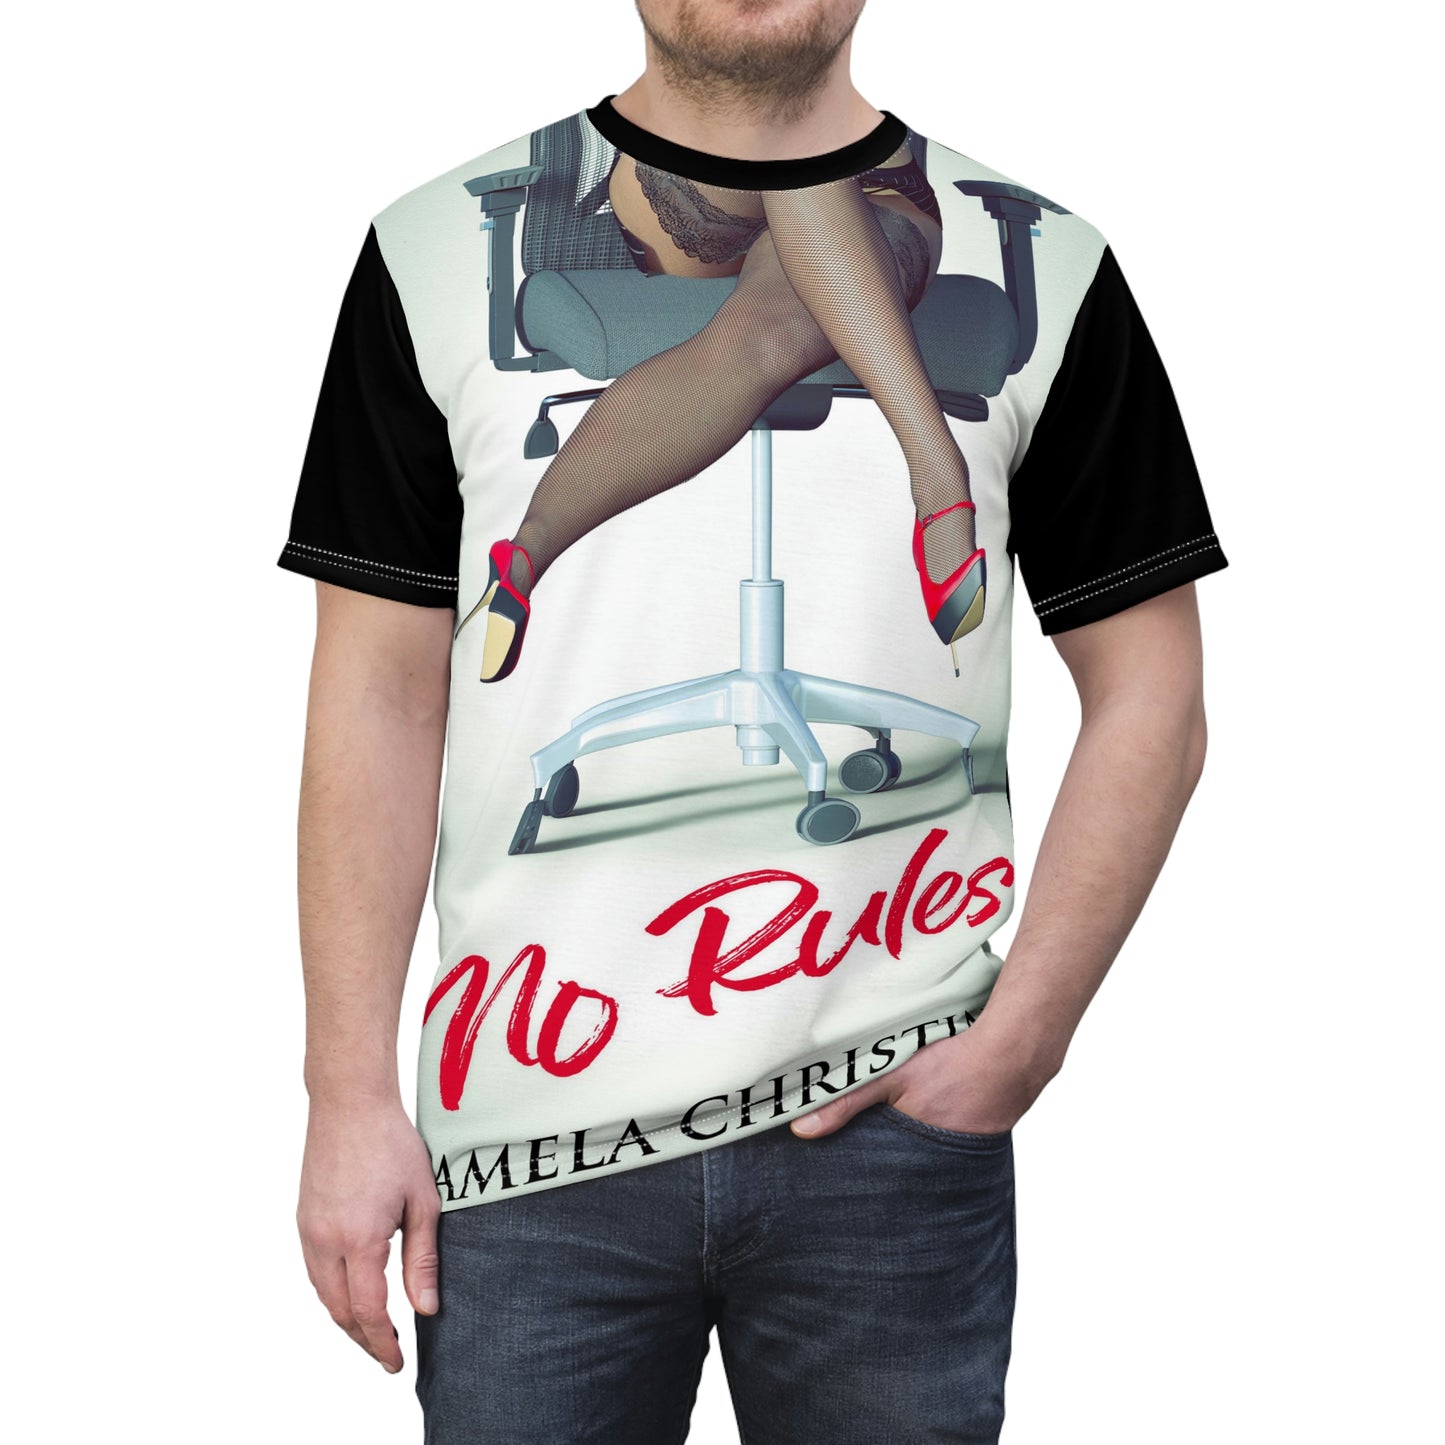 No Rules - Unisex All-Over Print Cut & Sew T-Shirt